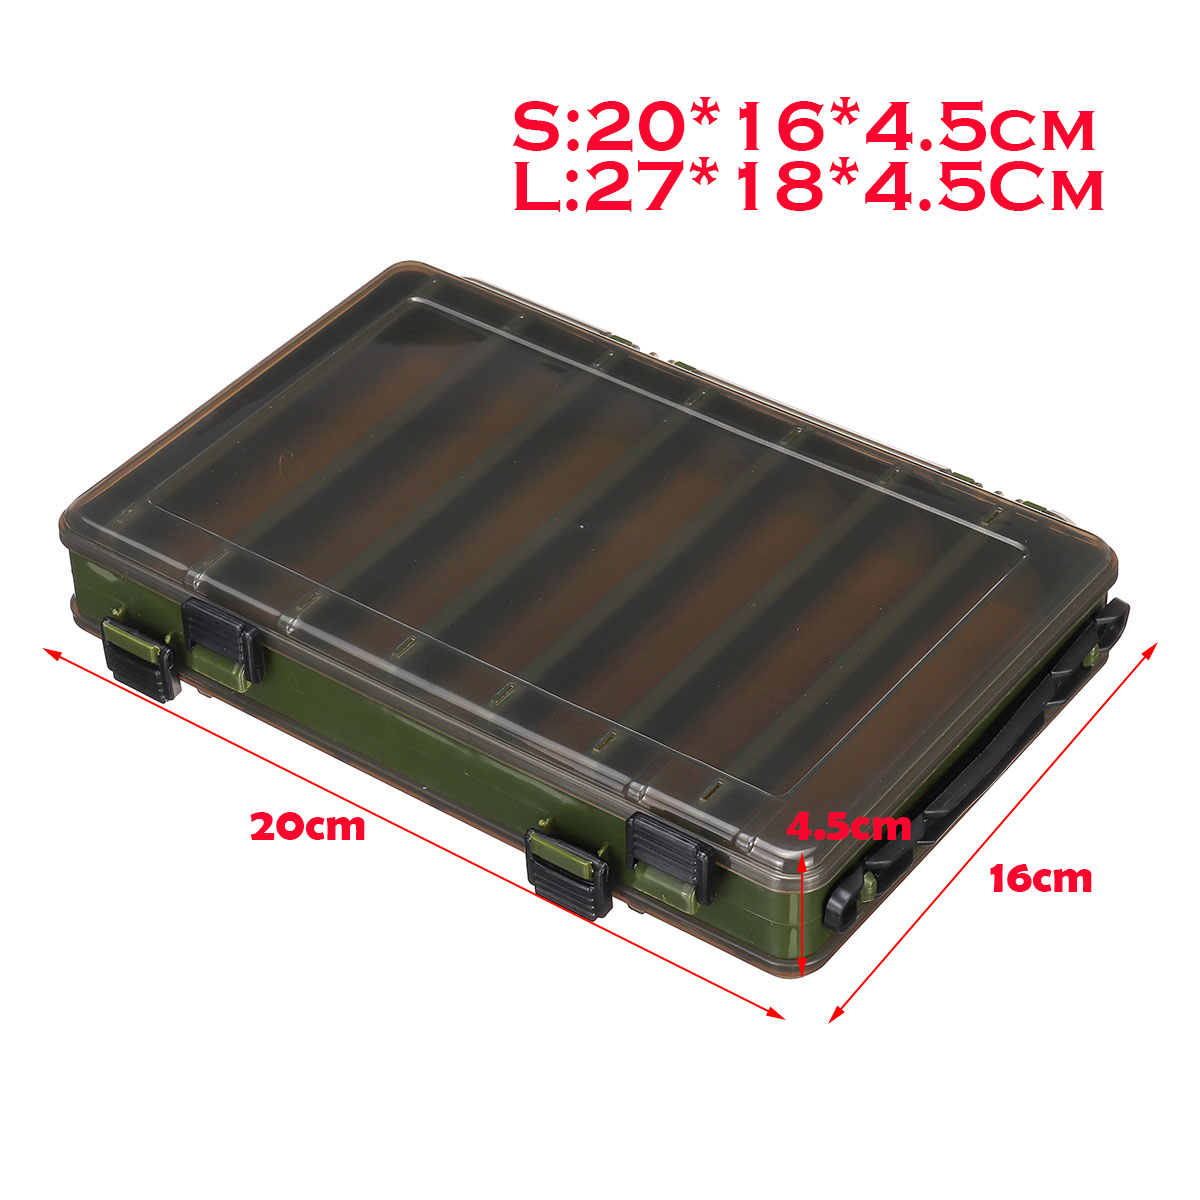 ZANLURE-Fishing-Box-Double-Sided-Fishing-Lure-Pesca-Accessories-Bait-Lure-Case-Box-Container-1552970-5